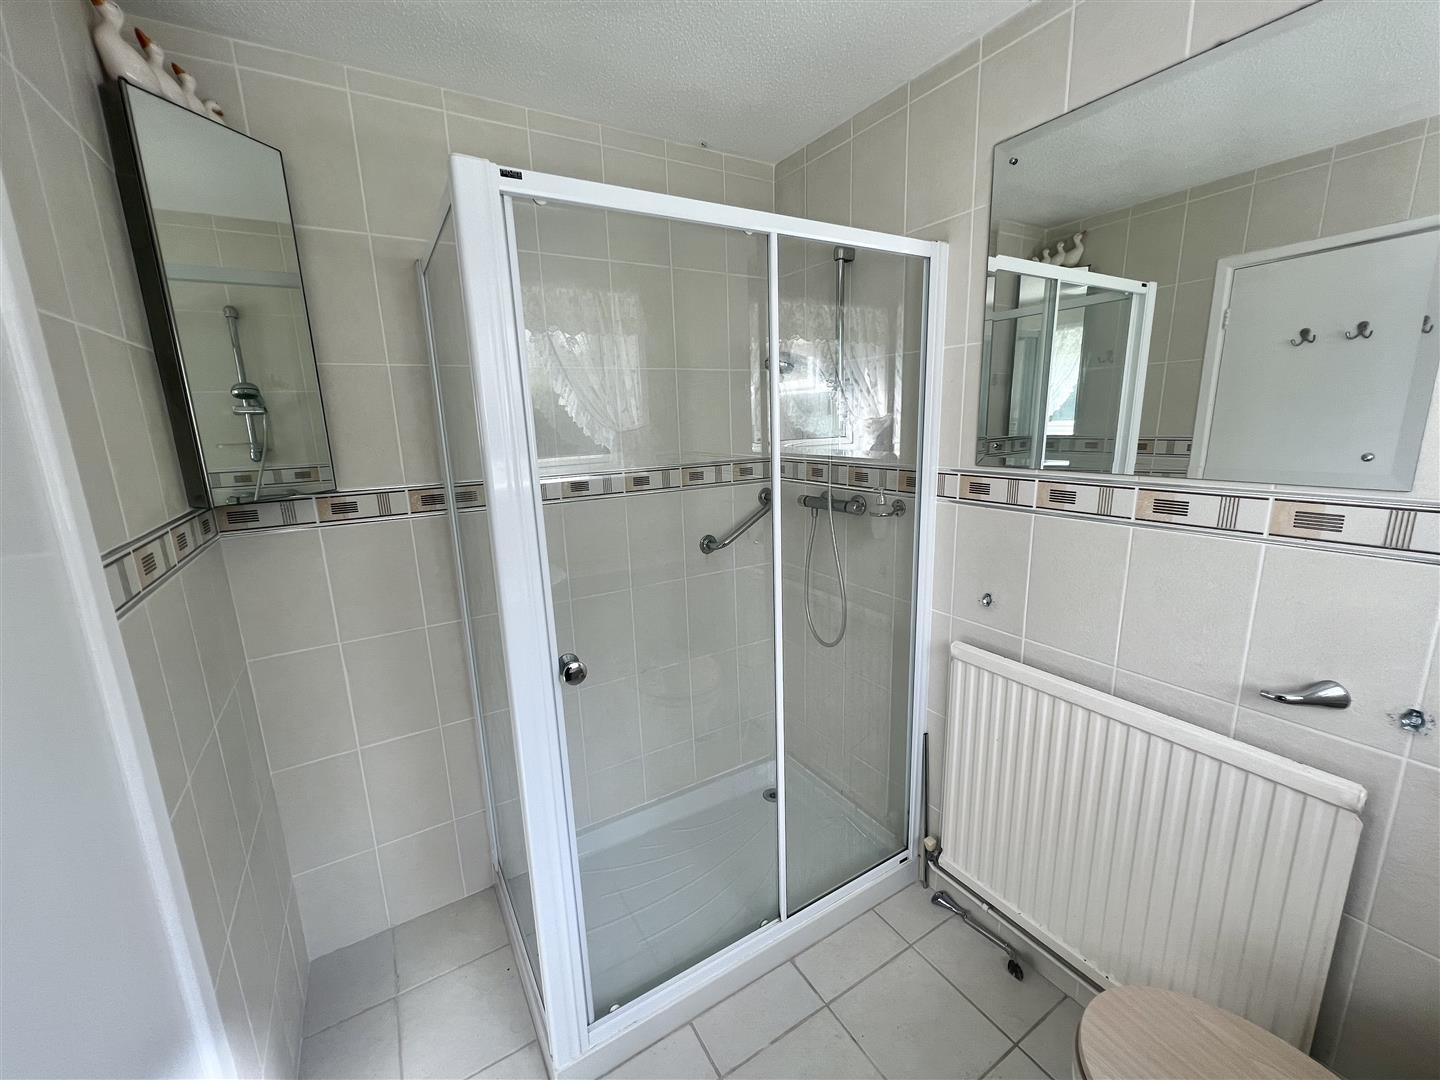 a bathroom with a separate shower area